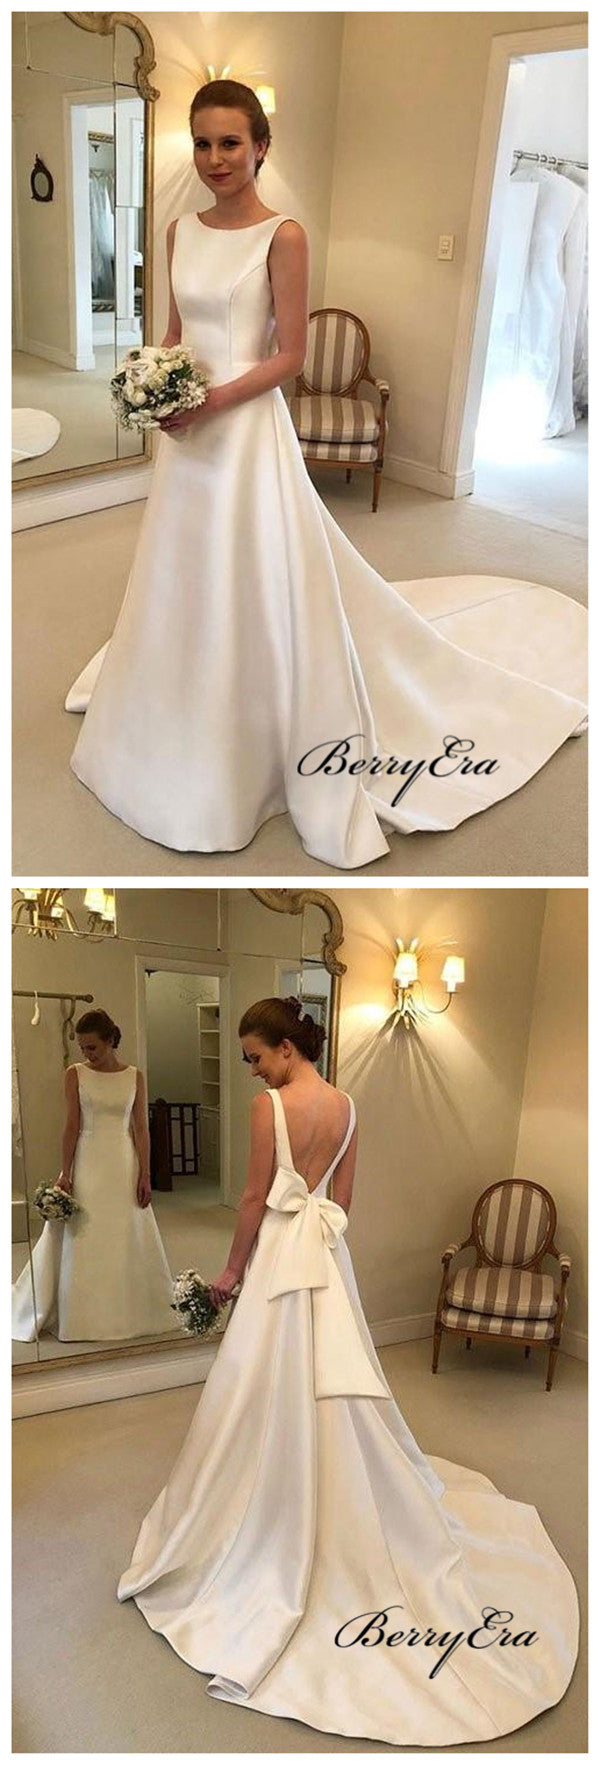 Newest Structured Satin Wedding Dresses with Bow Ribbon Sash Back, Bridal Gowns